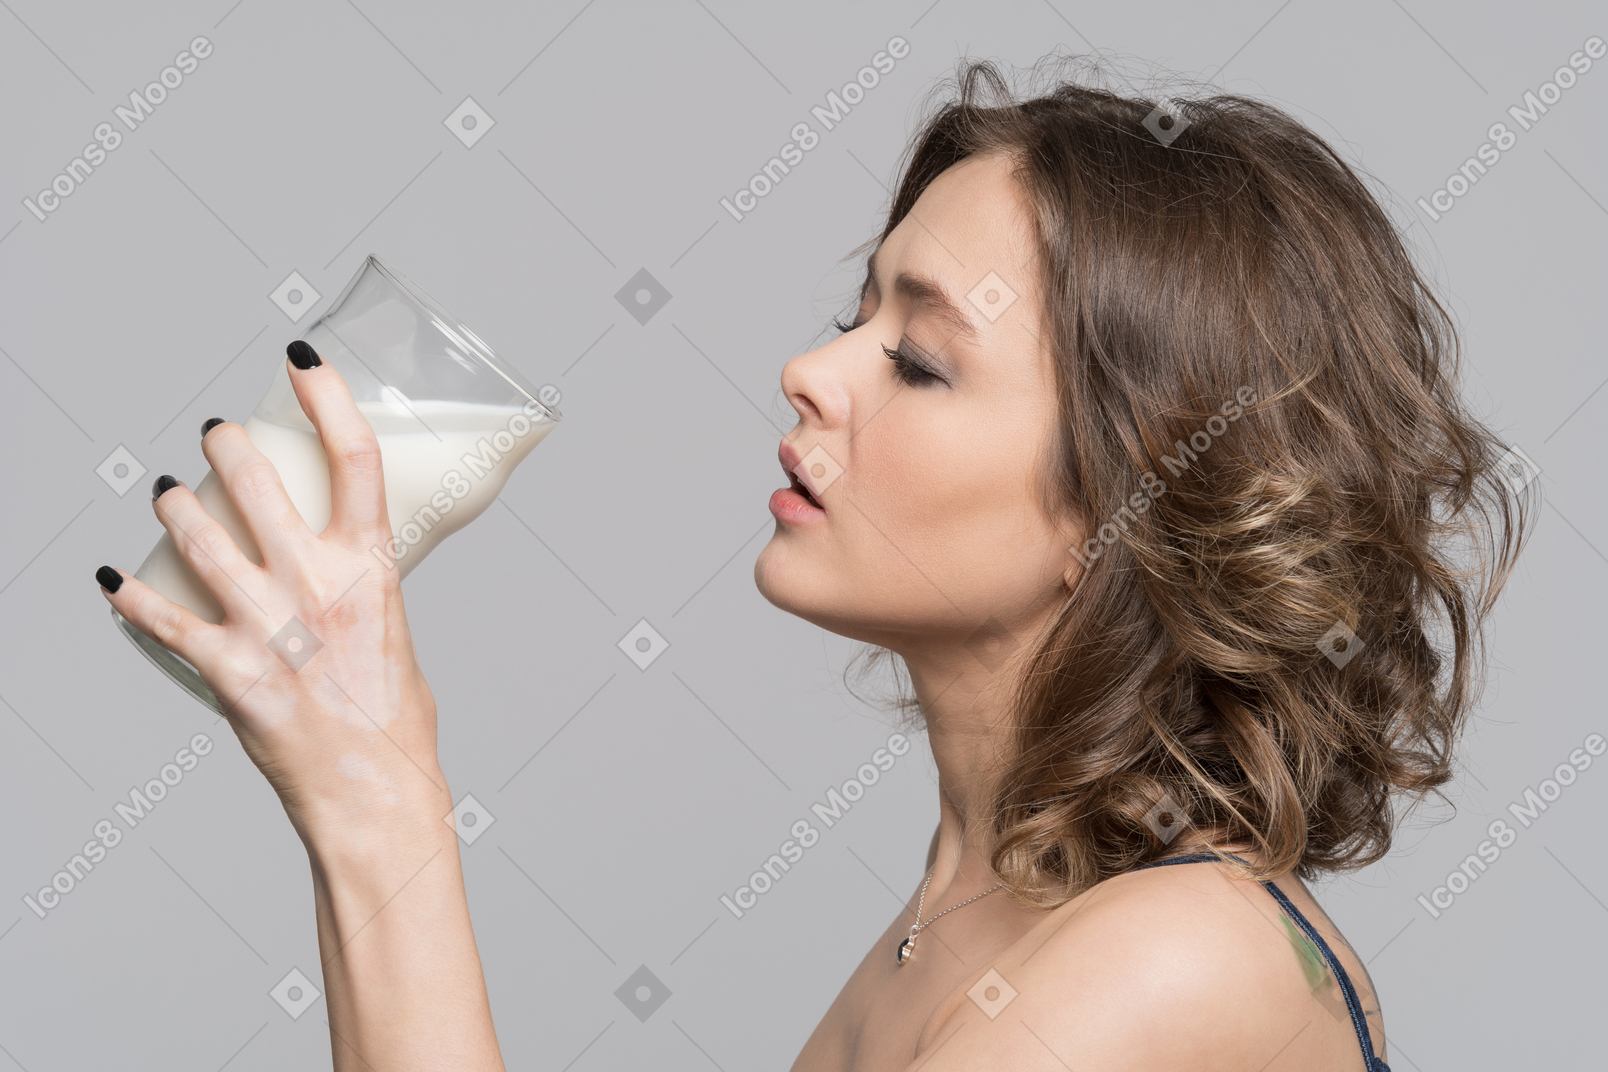 A young woman is about to drink a glass of milk